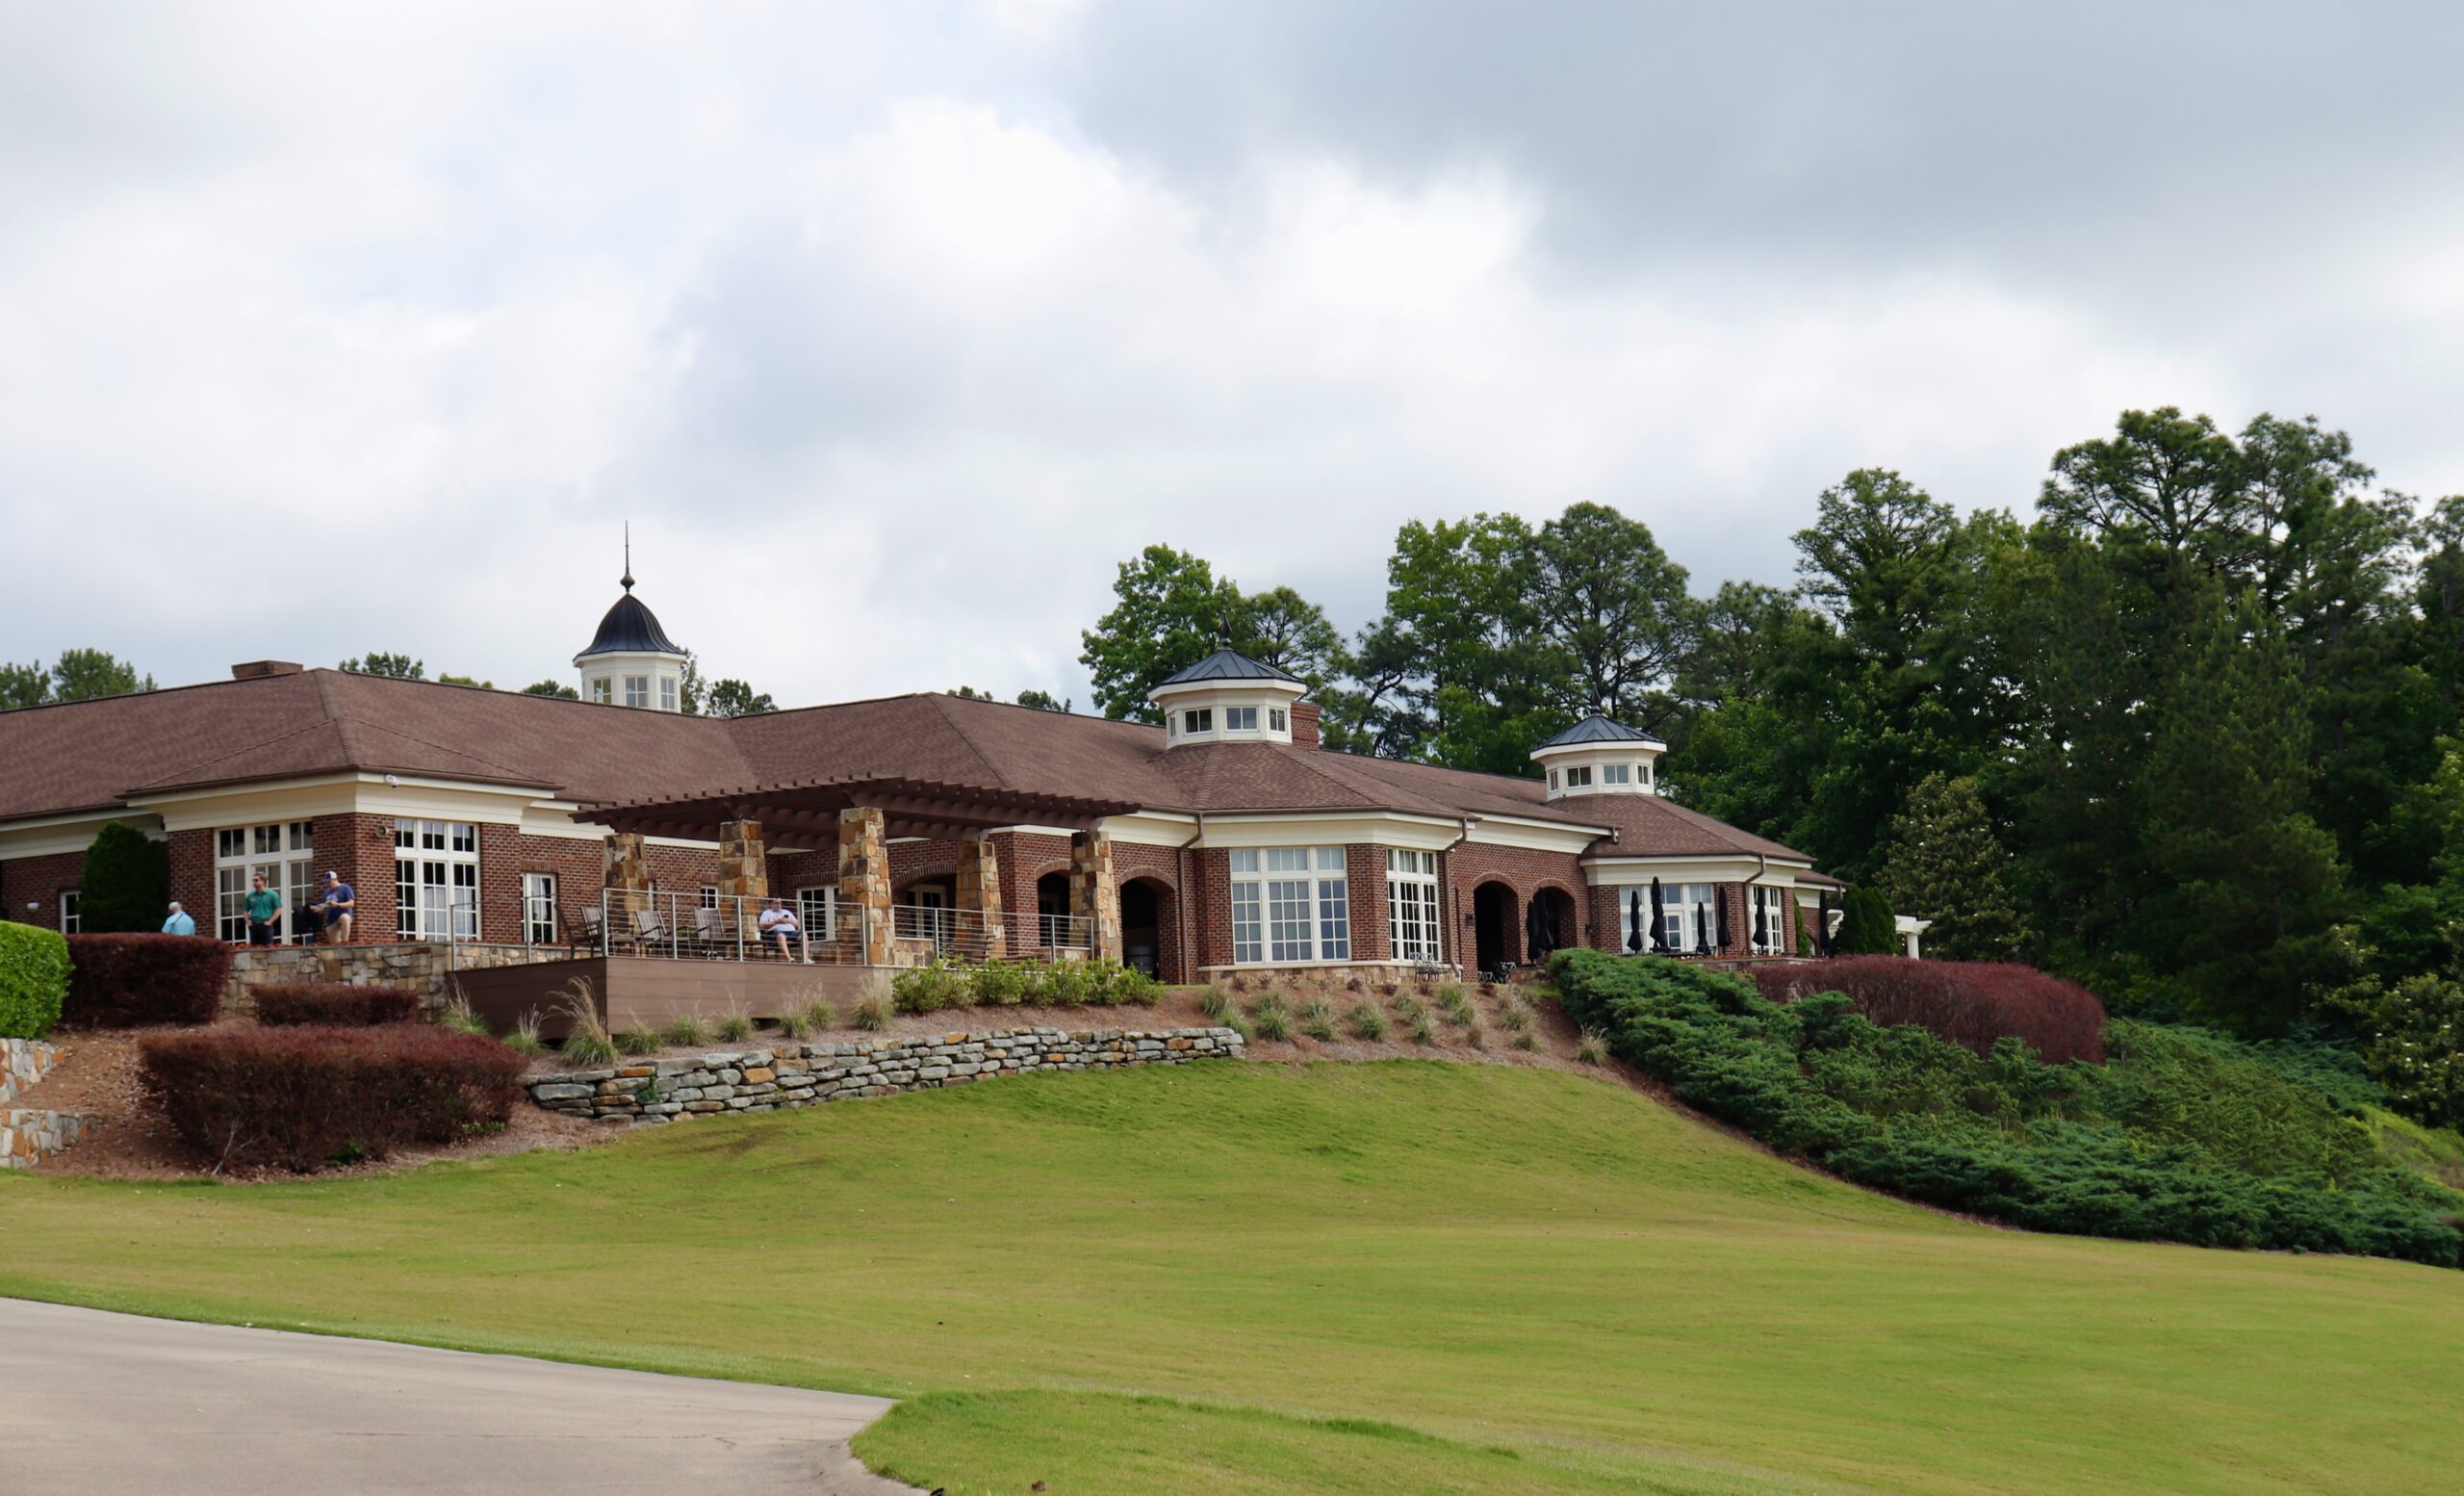 Inverness Country Club clubhouse. A beautiful building on a hill with green grass